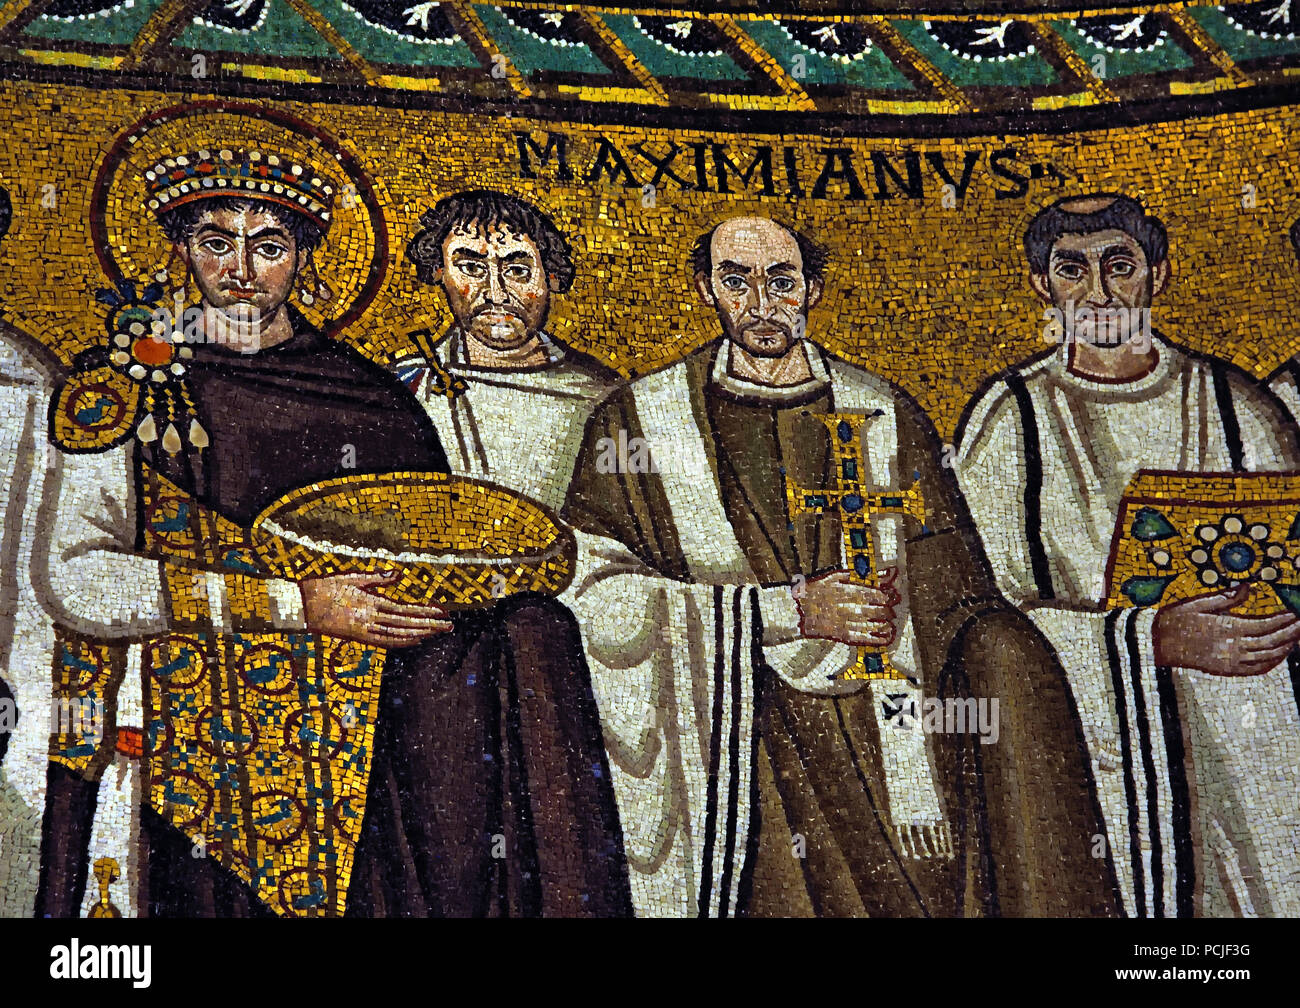 Emperor Justinianus in the Basilica of San Vitale 547 AD 6th Century in Ravenna - Mosaics ( late Roman and Byzantine architecture,) Emilia-Romagna - Northern Italy. ( UNESCO World Heritage site ) Stock Photo